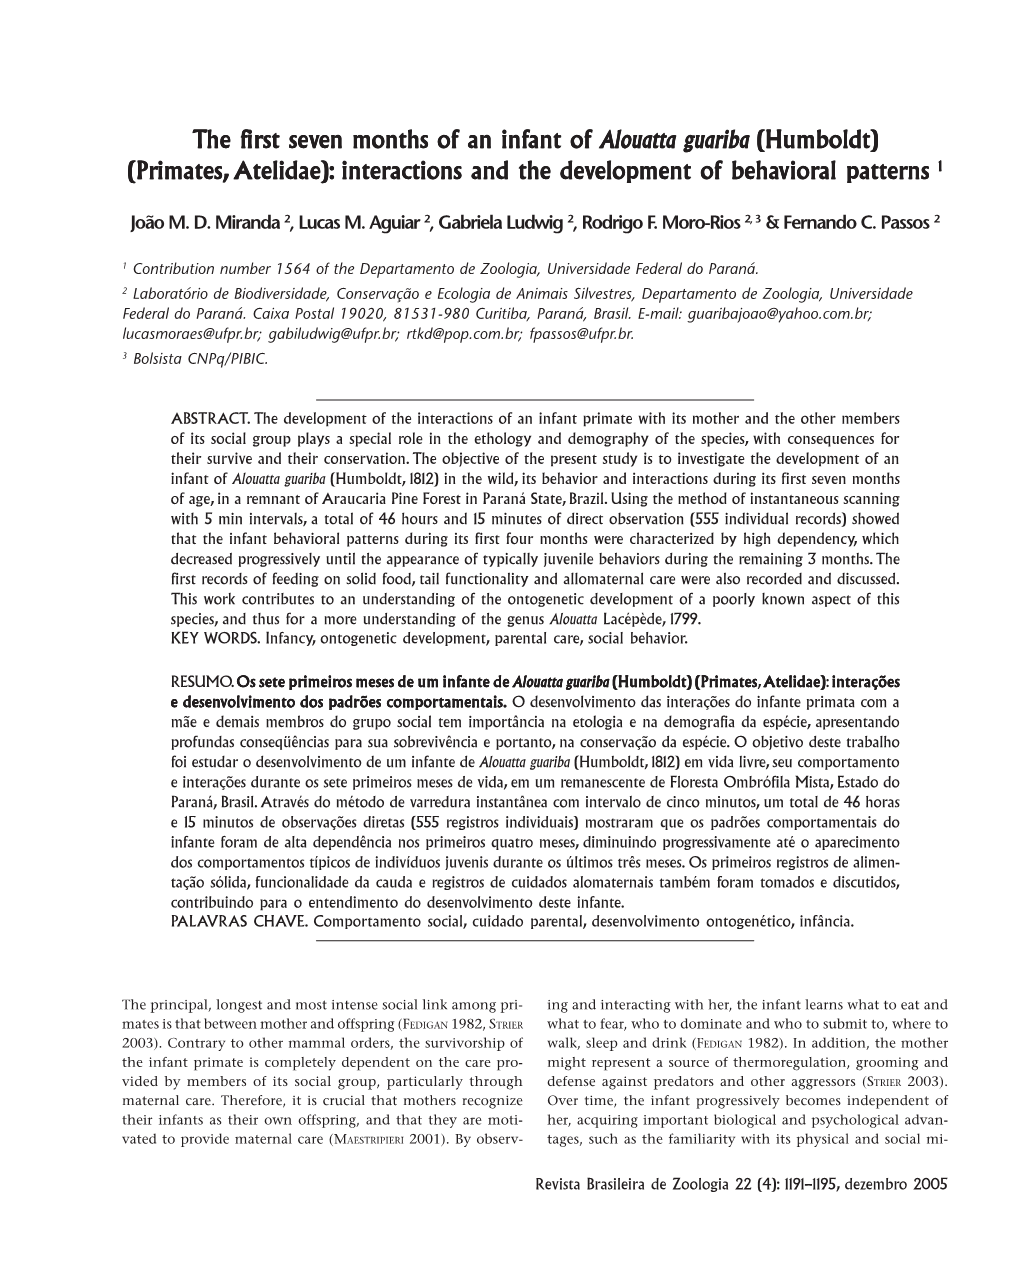 Primates, Atelidae): Interactions and the Development of Behavioral Patterns 1